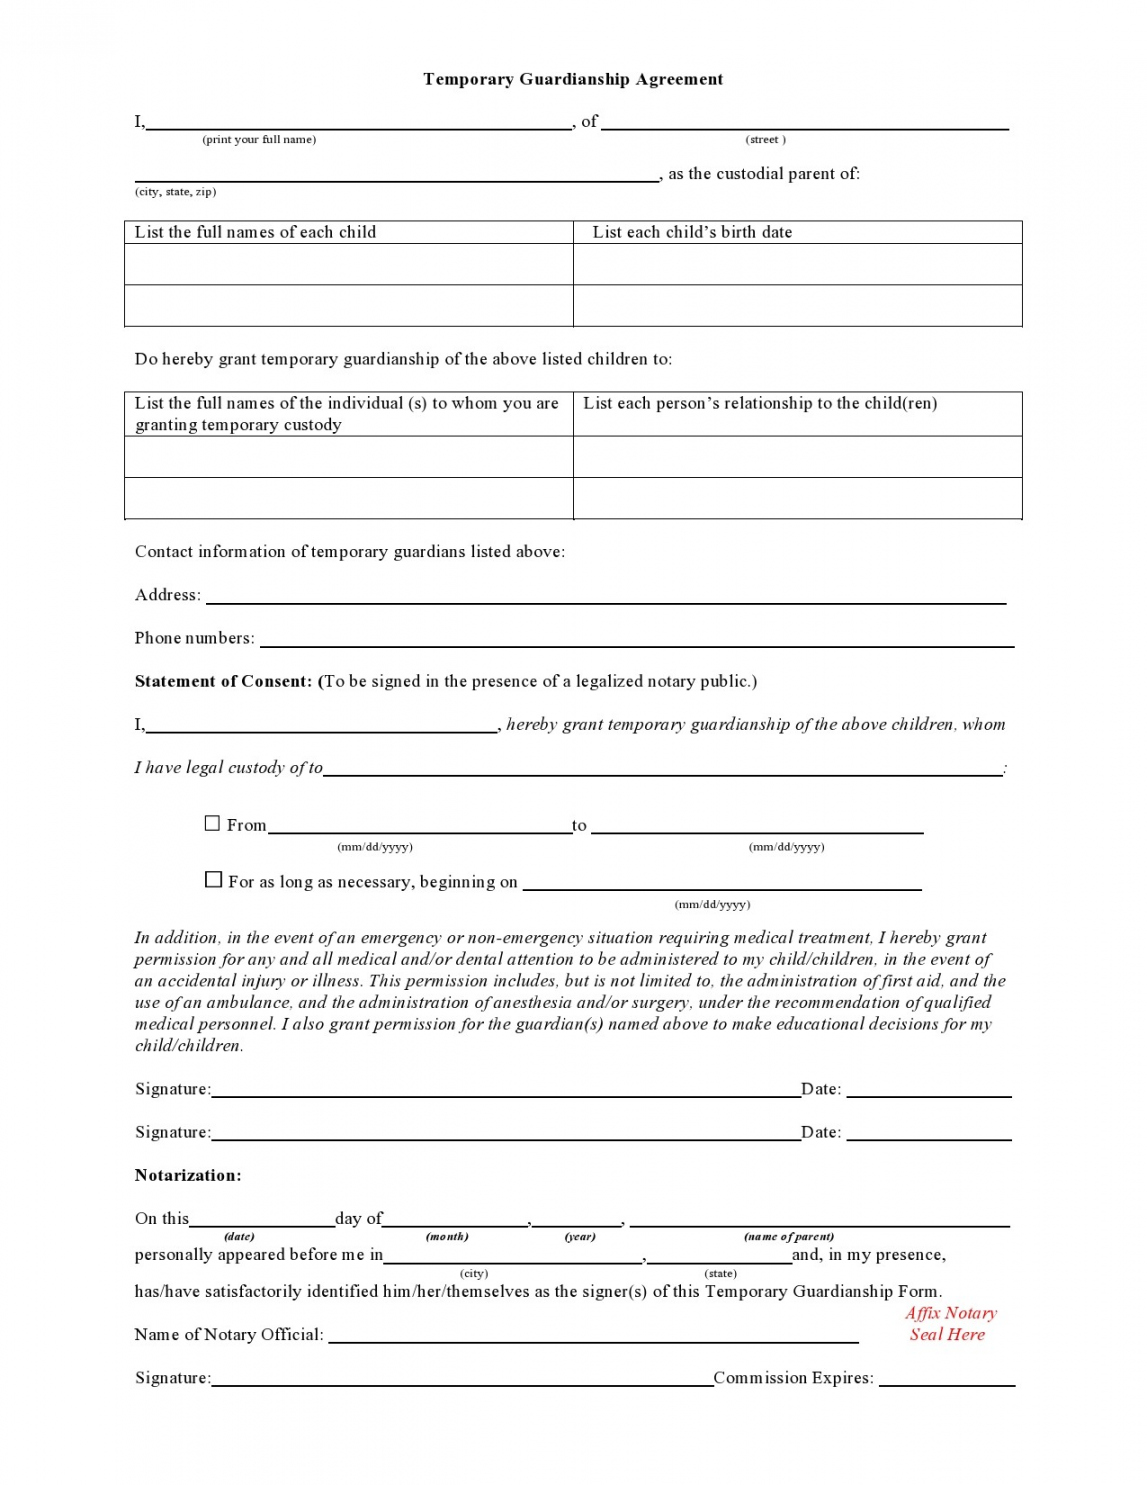 Printable Temporary Guardianship Forms [All States] ᐅ - FREE Printables - Legal Guardianship Free Printable Guardianship Forms